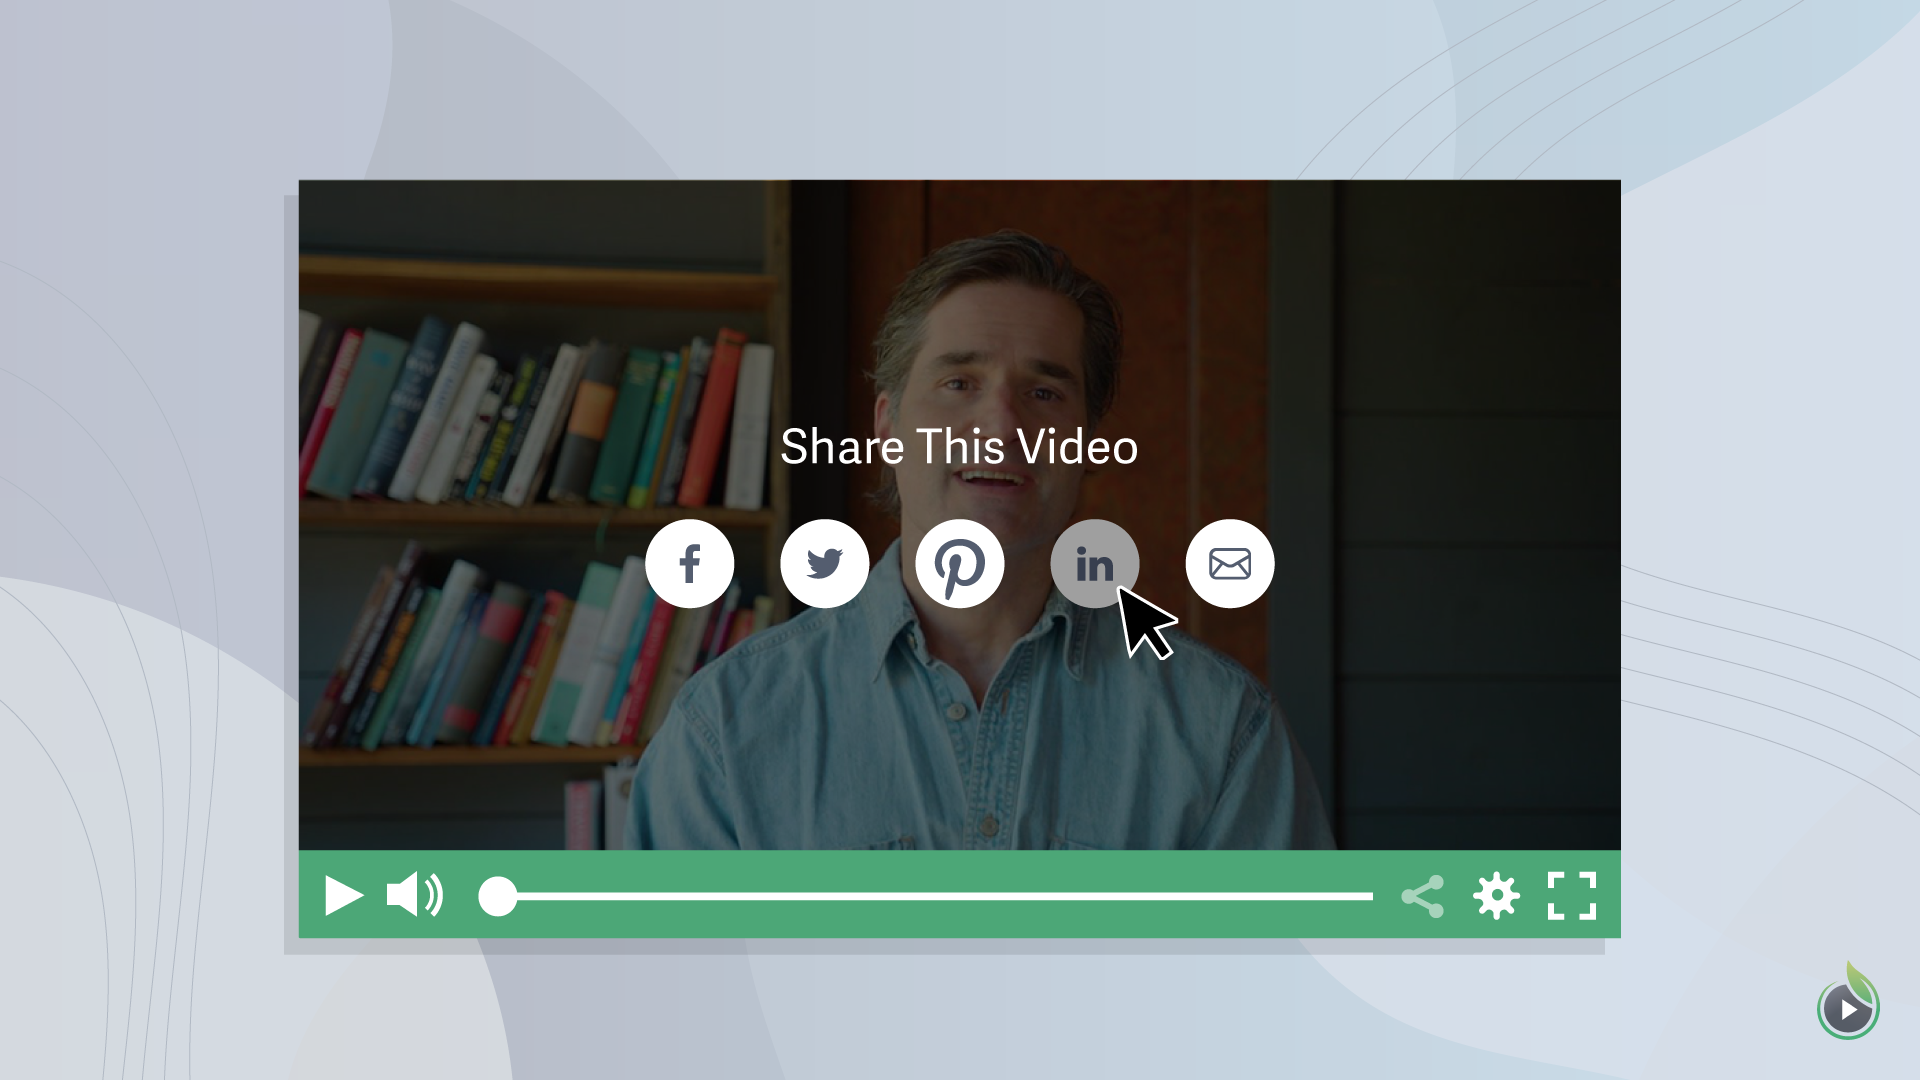 Promote your video with SEO and social sharing tools built into our player.